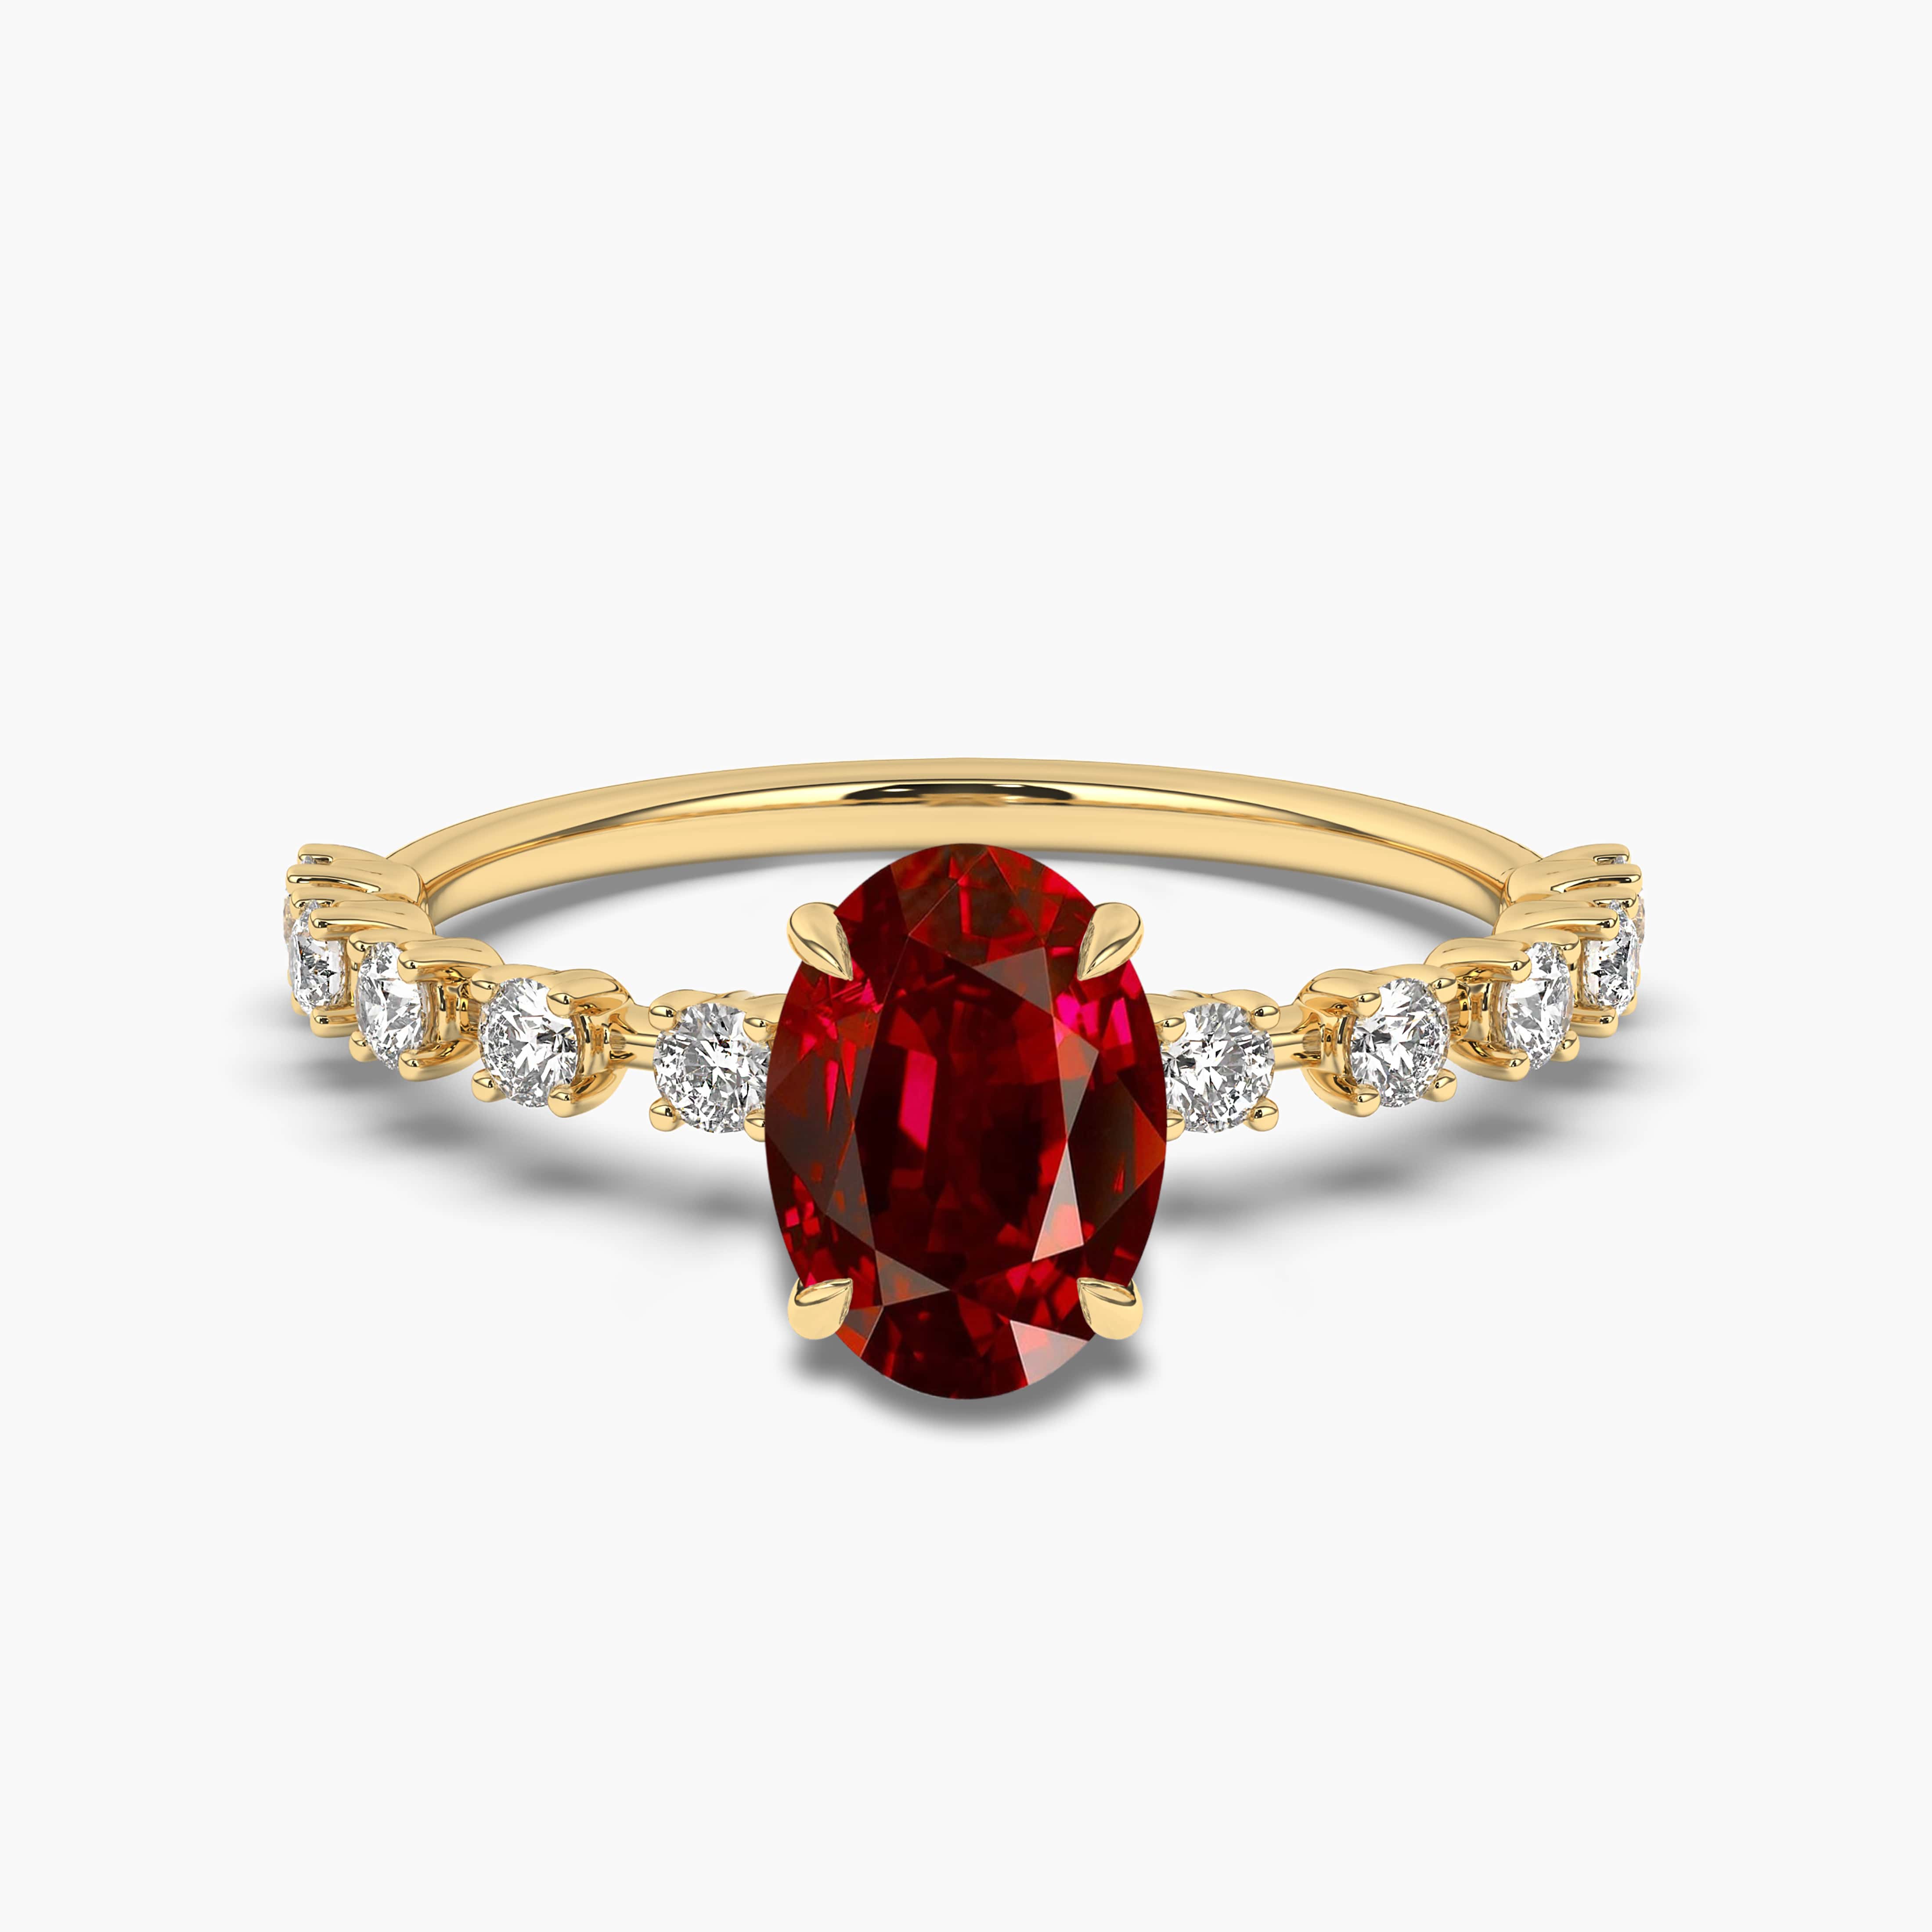 YELLOW GOLD OVAL RUBY AND DIAMOND ENGAGEMENT RING